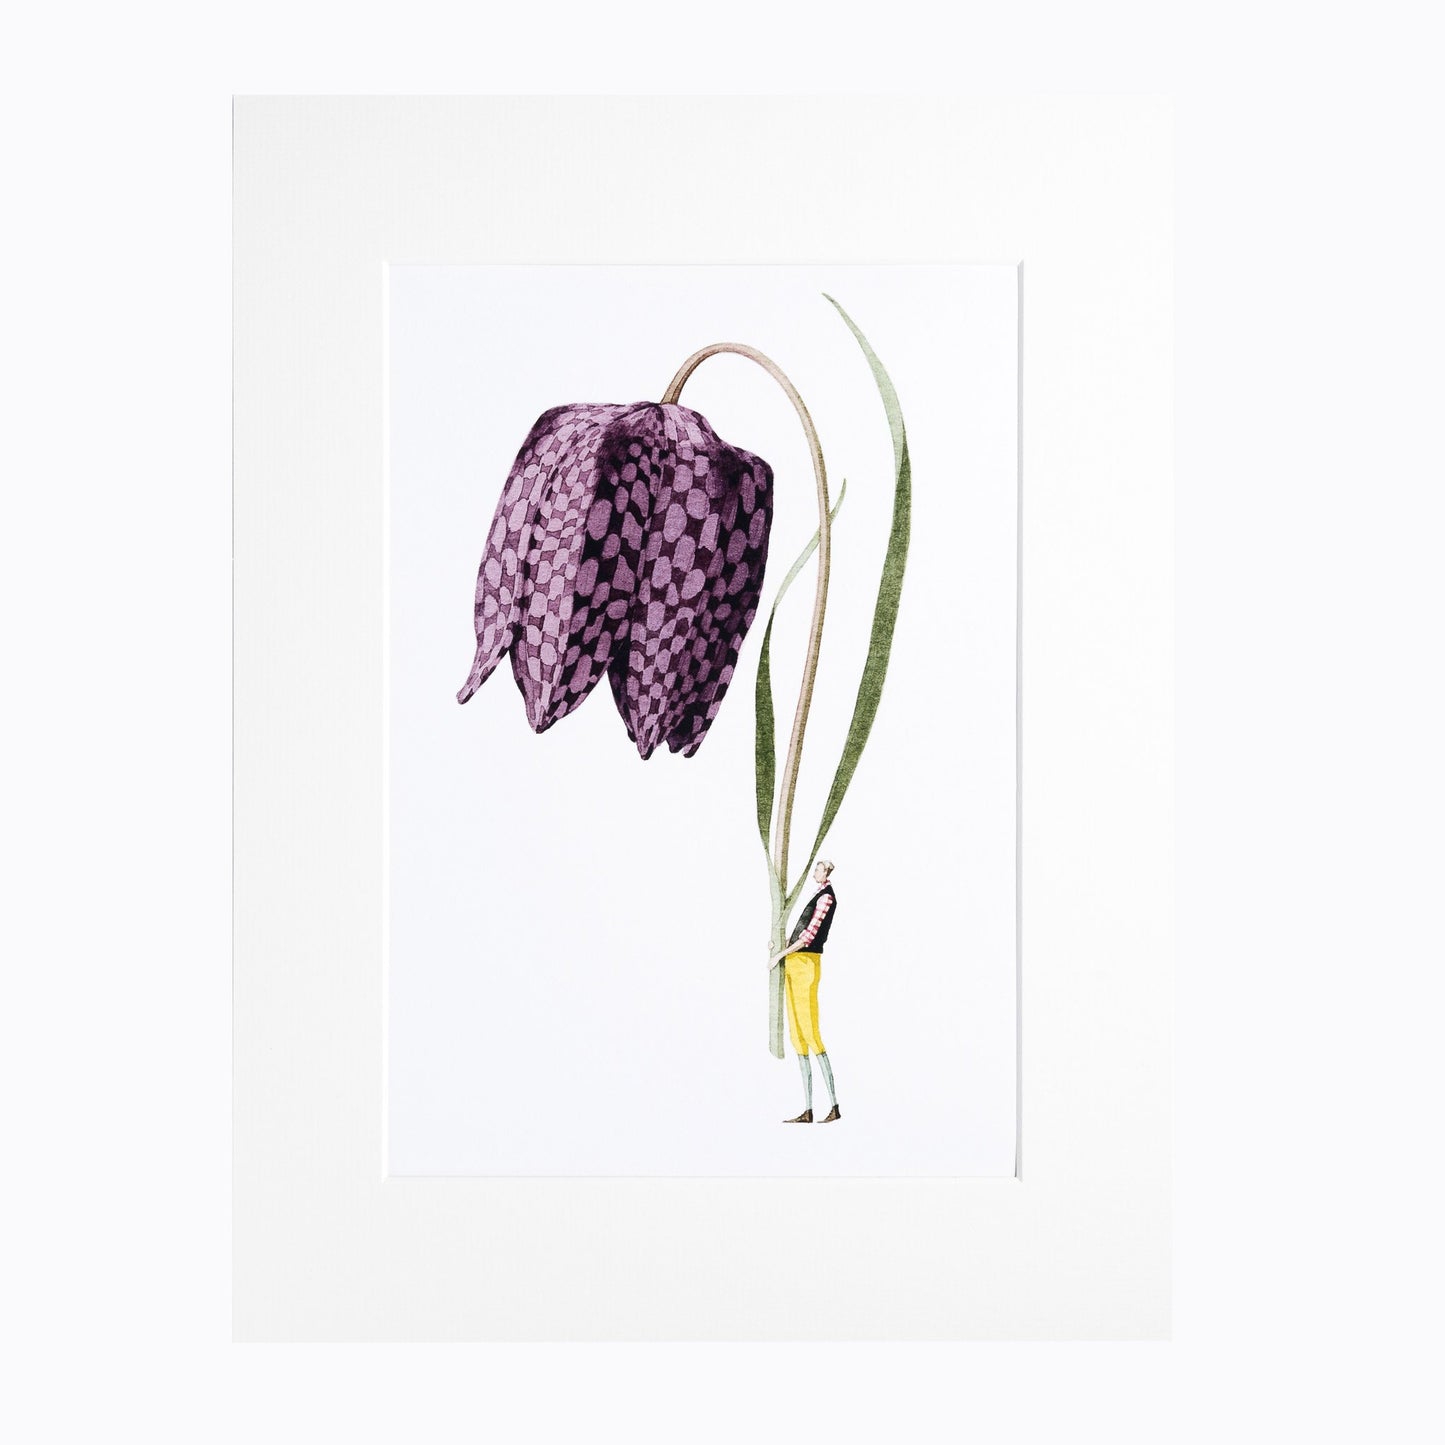 giclee print, mounted print, print, fritillary, illustration, made in england, flowers, archival paper, art print